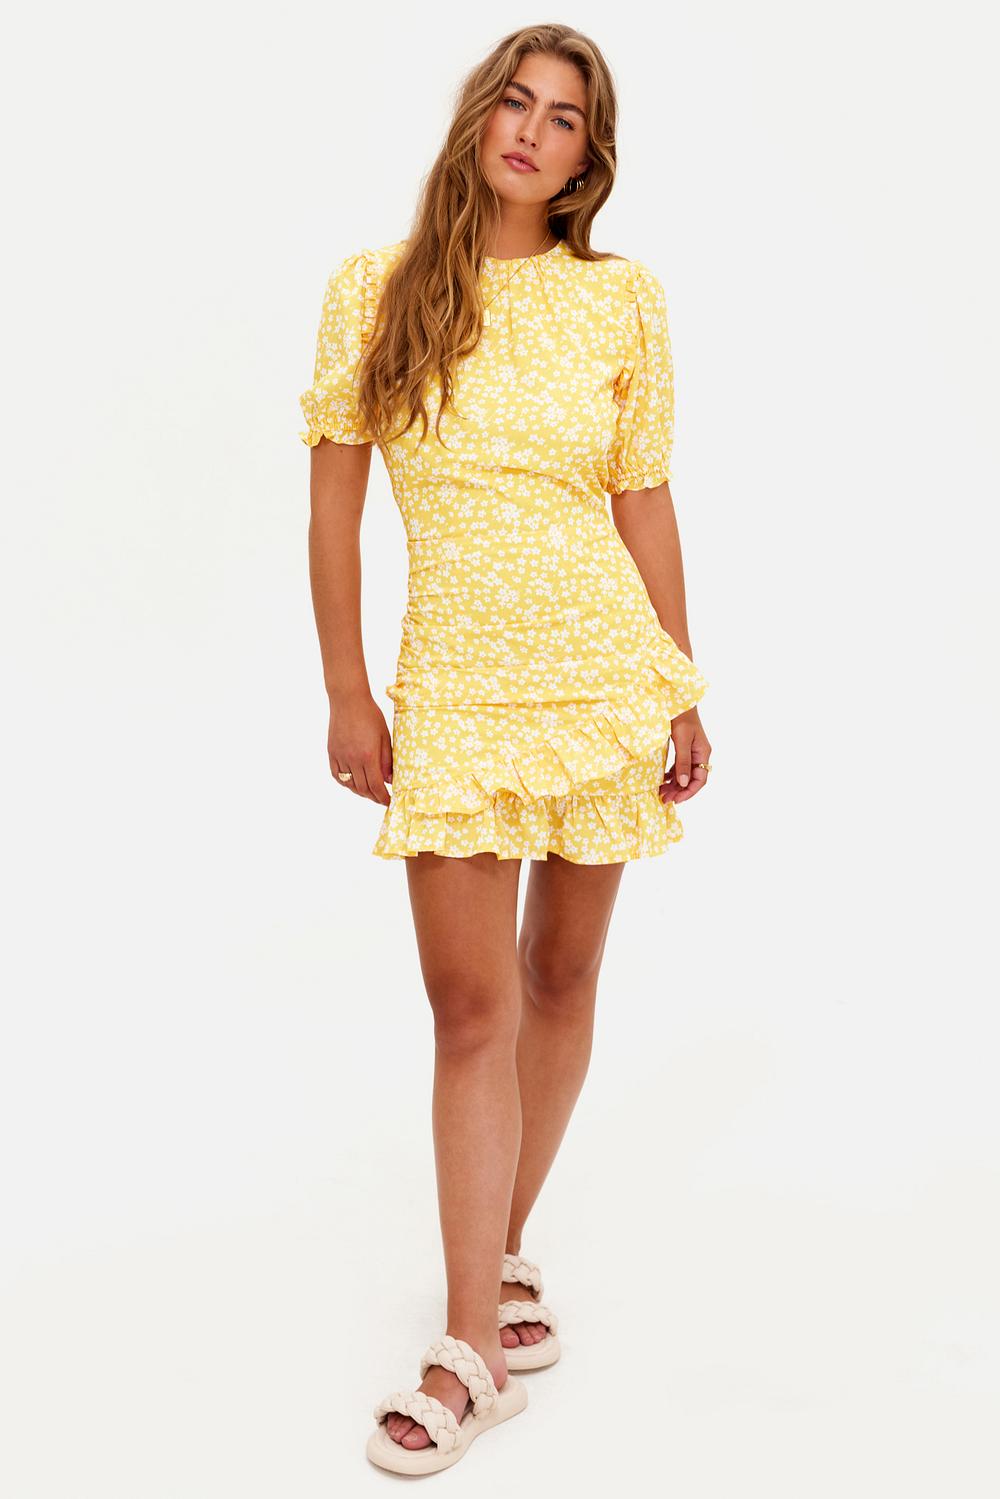 Yellow dress with floral print